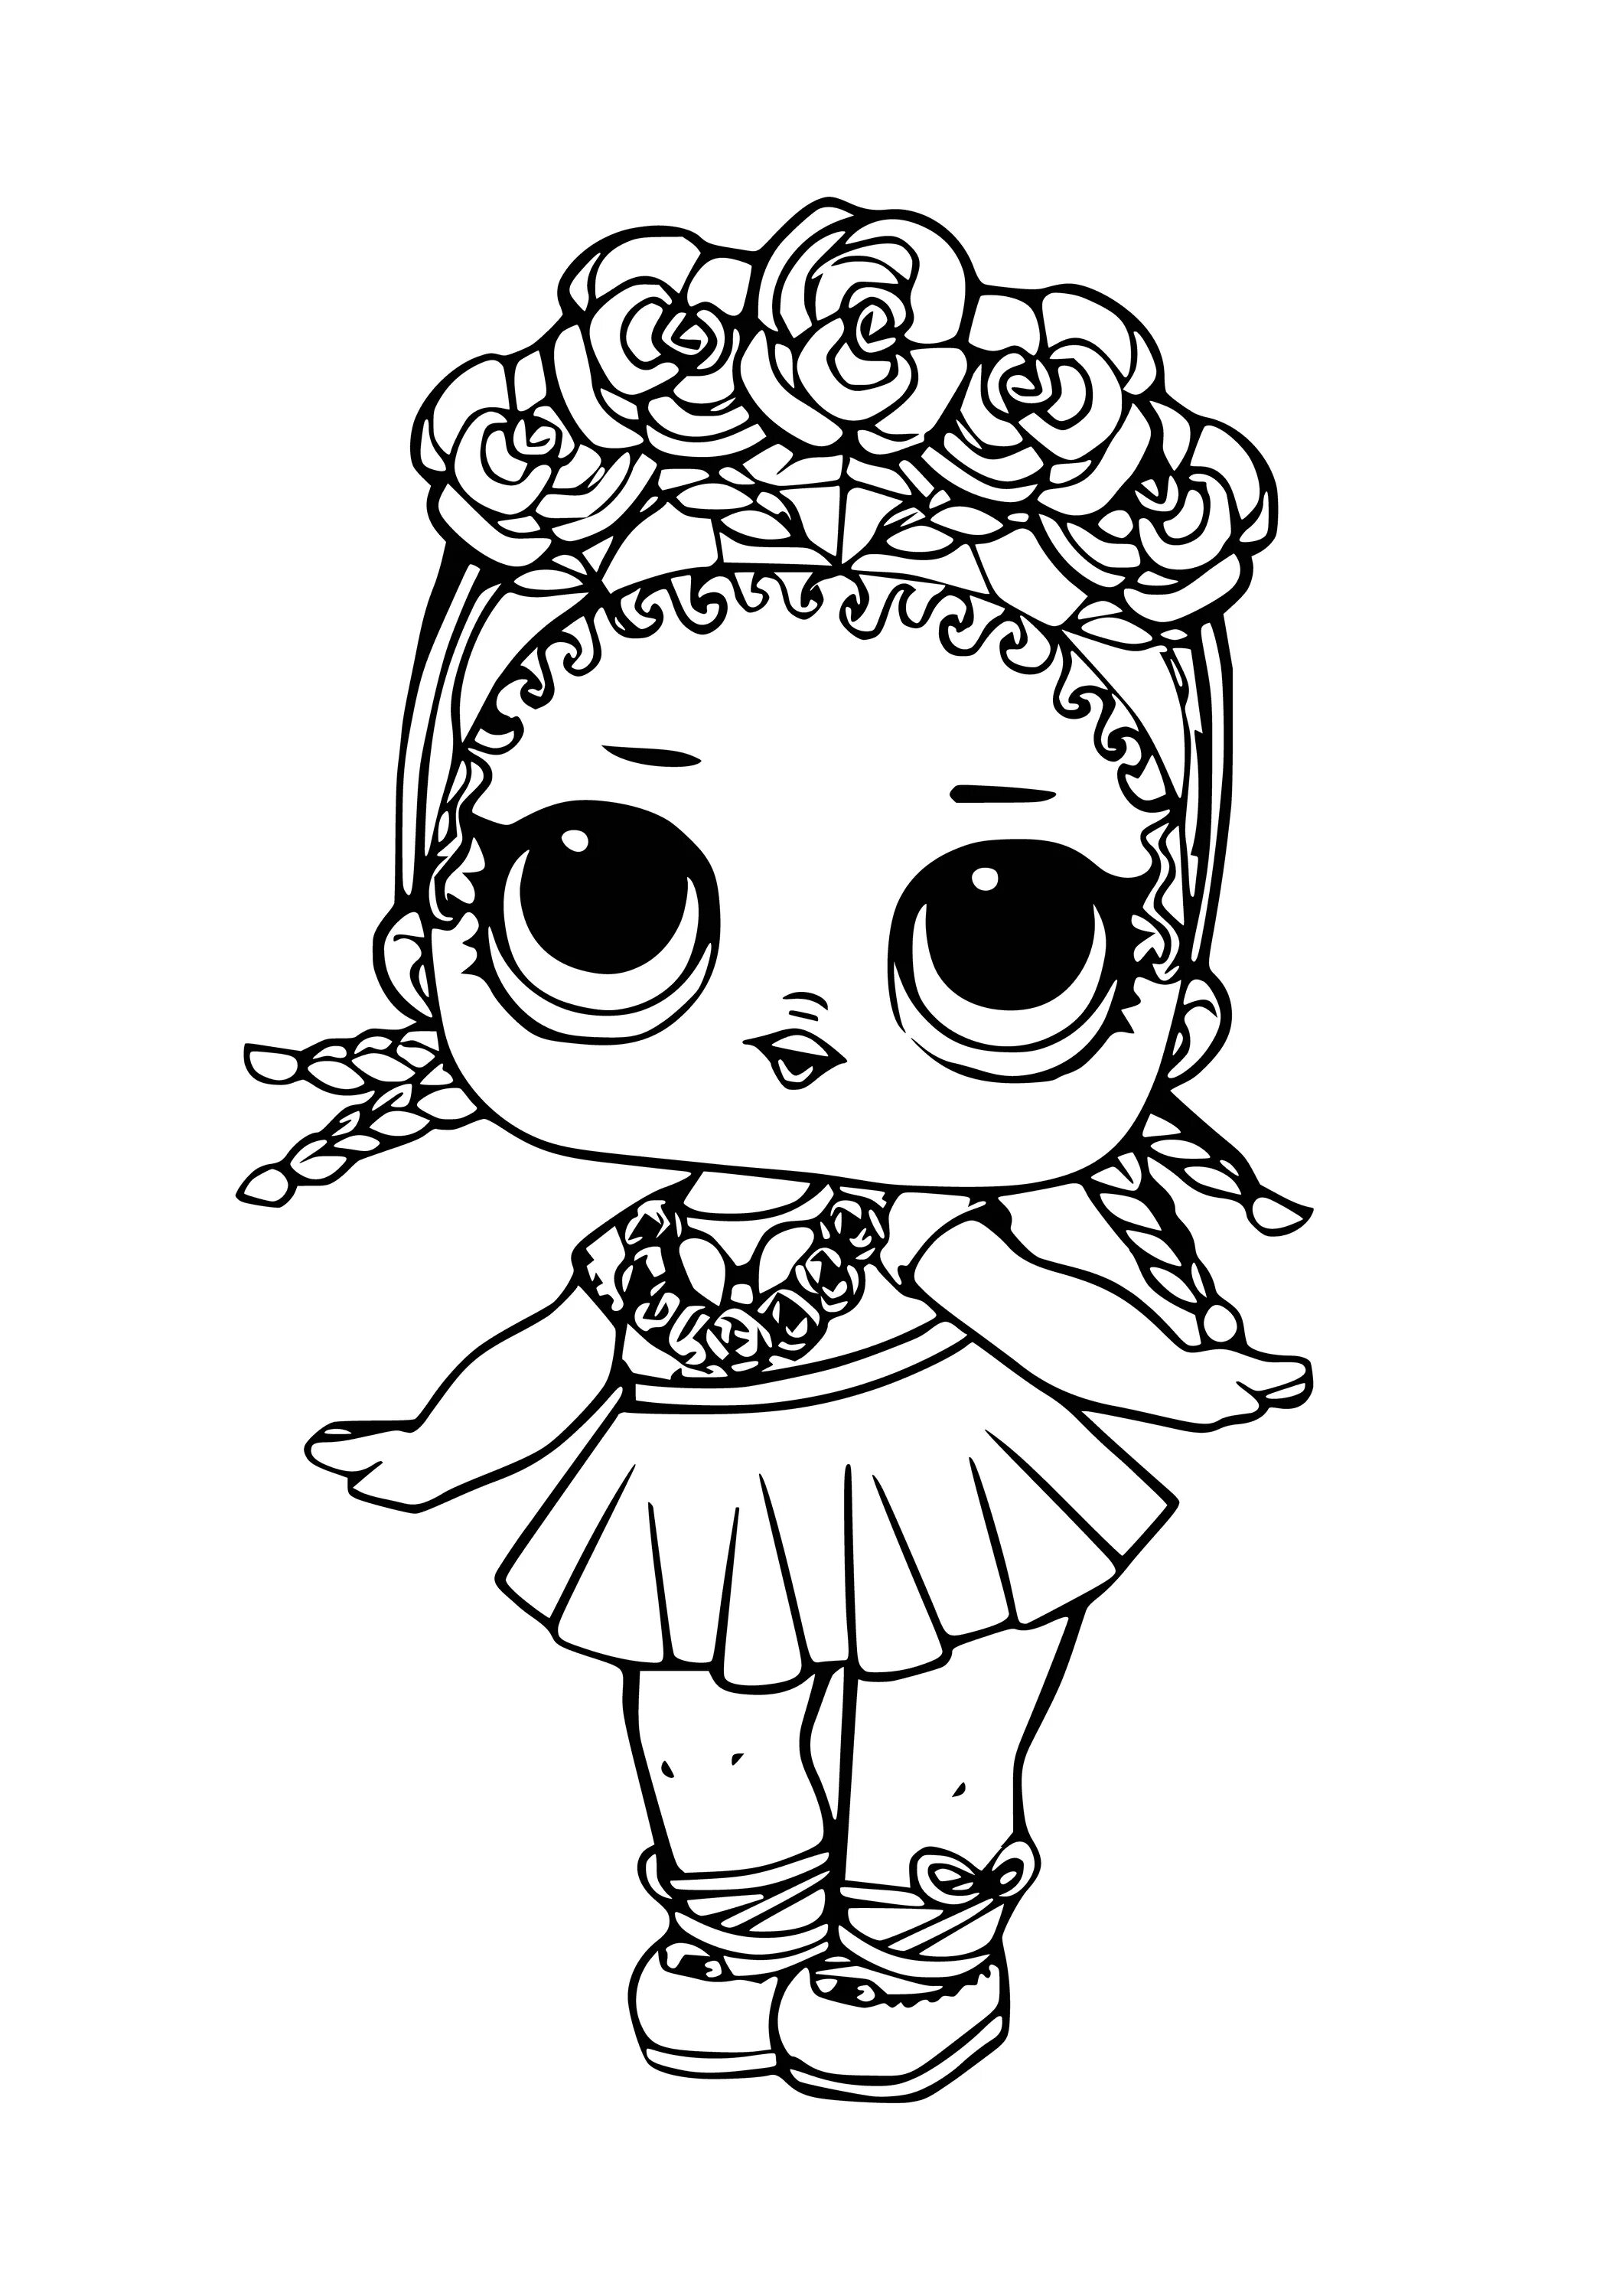 Fancy coloring lol doll for kids